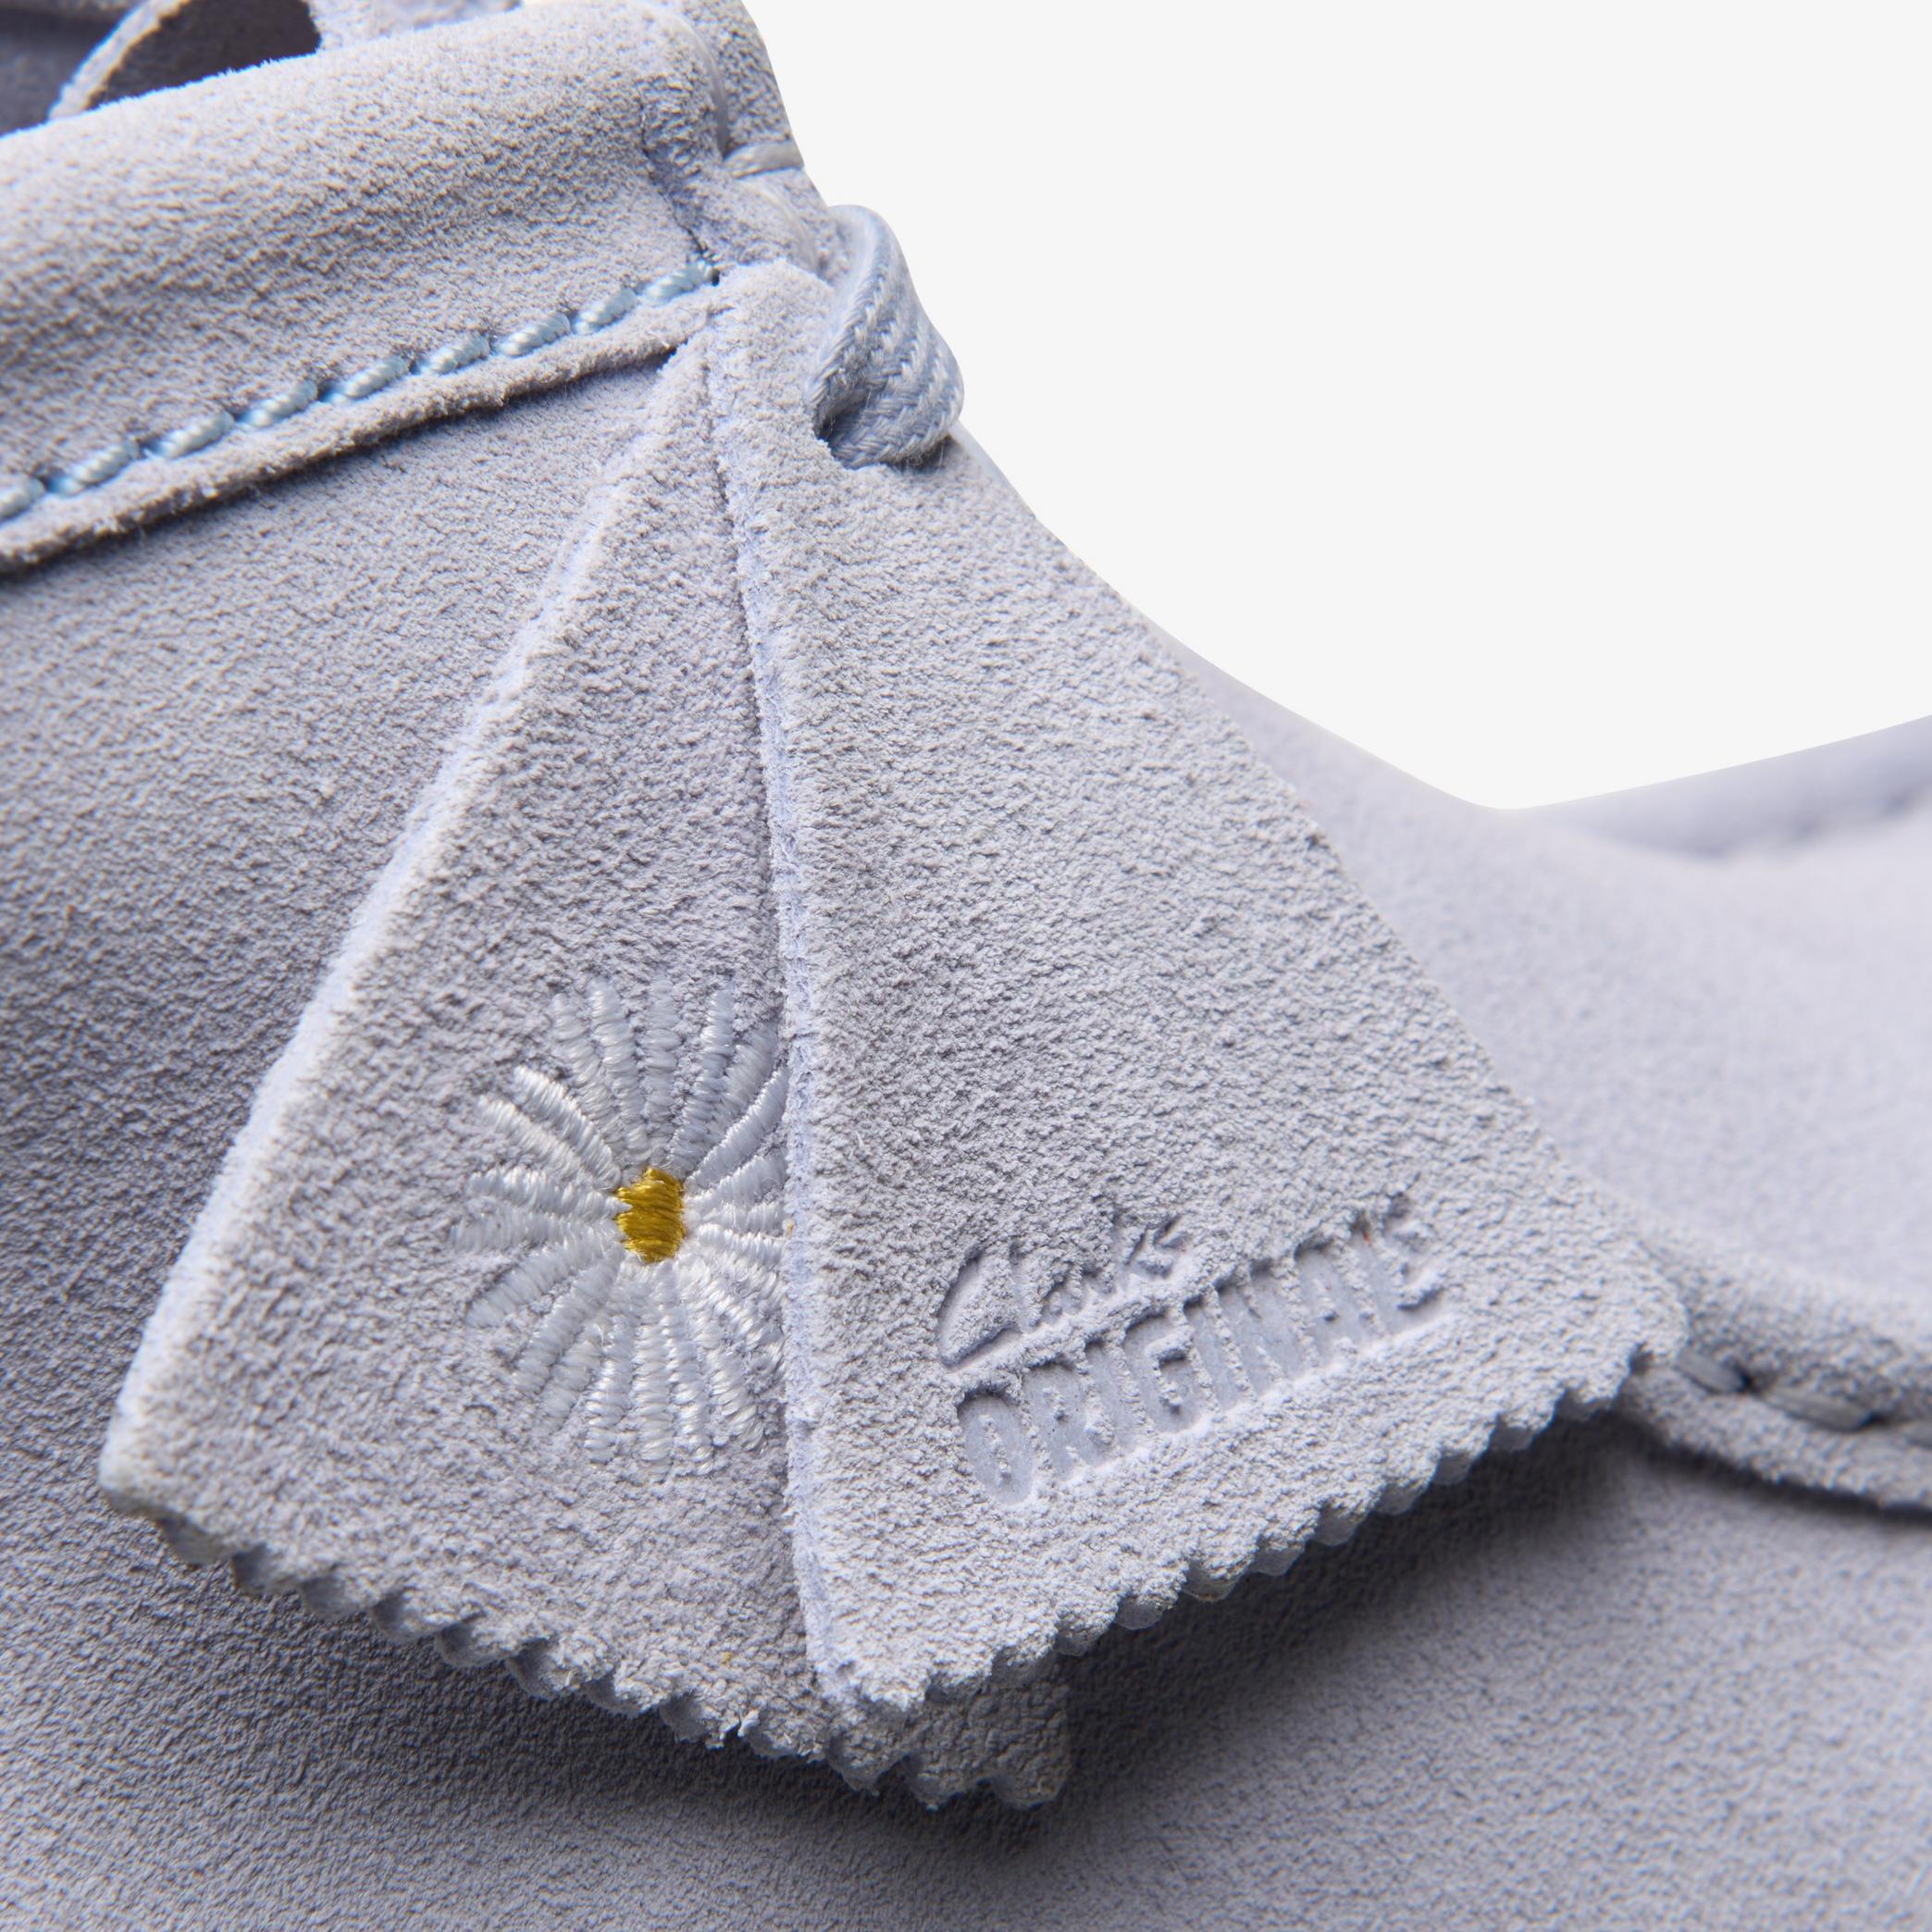 Wallabee Boot Cloud Grey Suede Wallabee, view 7 of 7